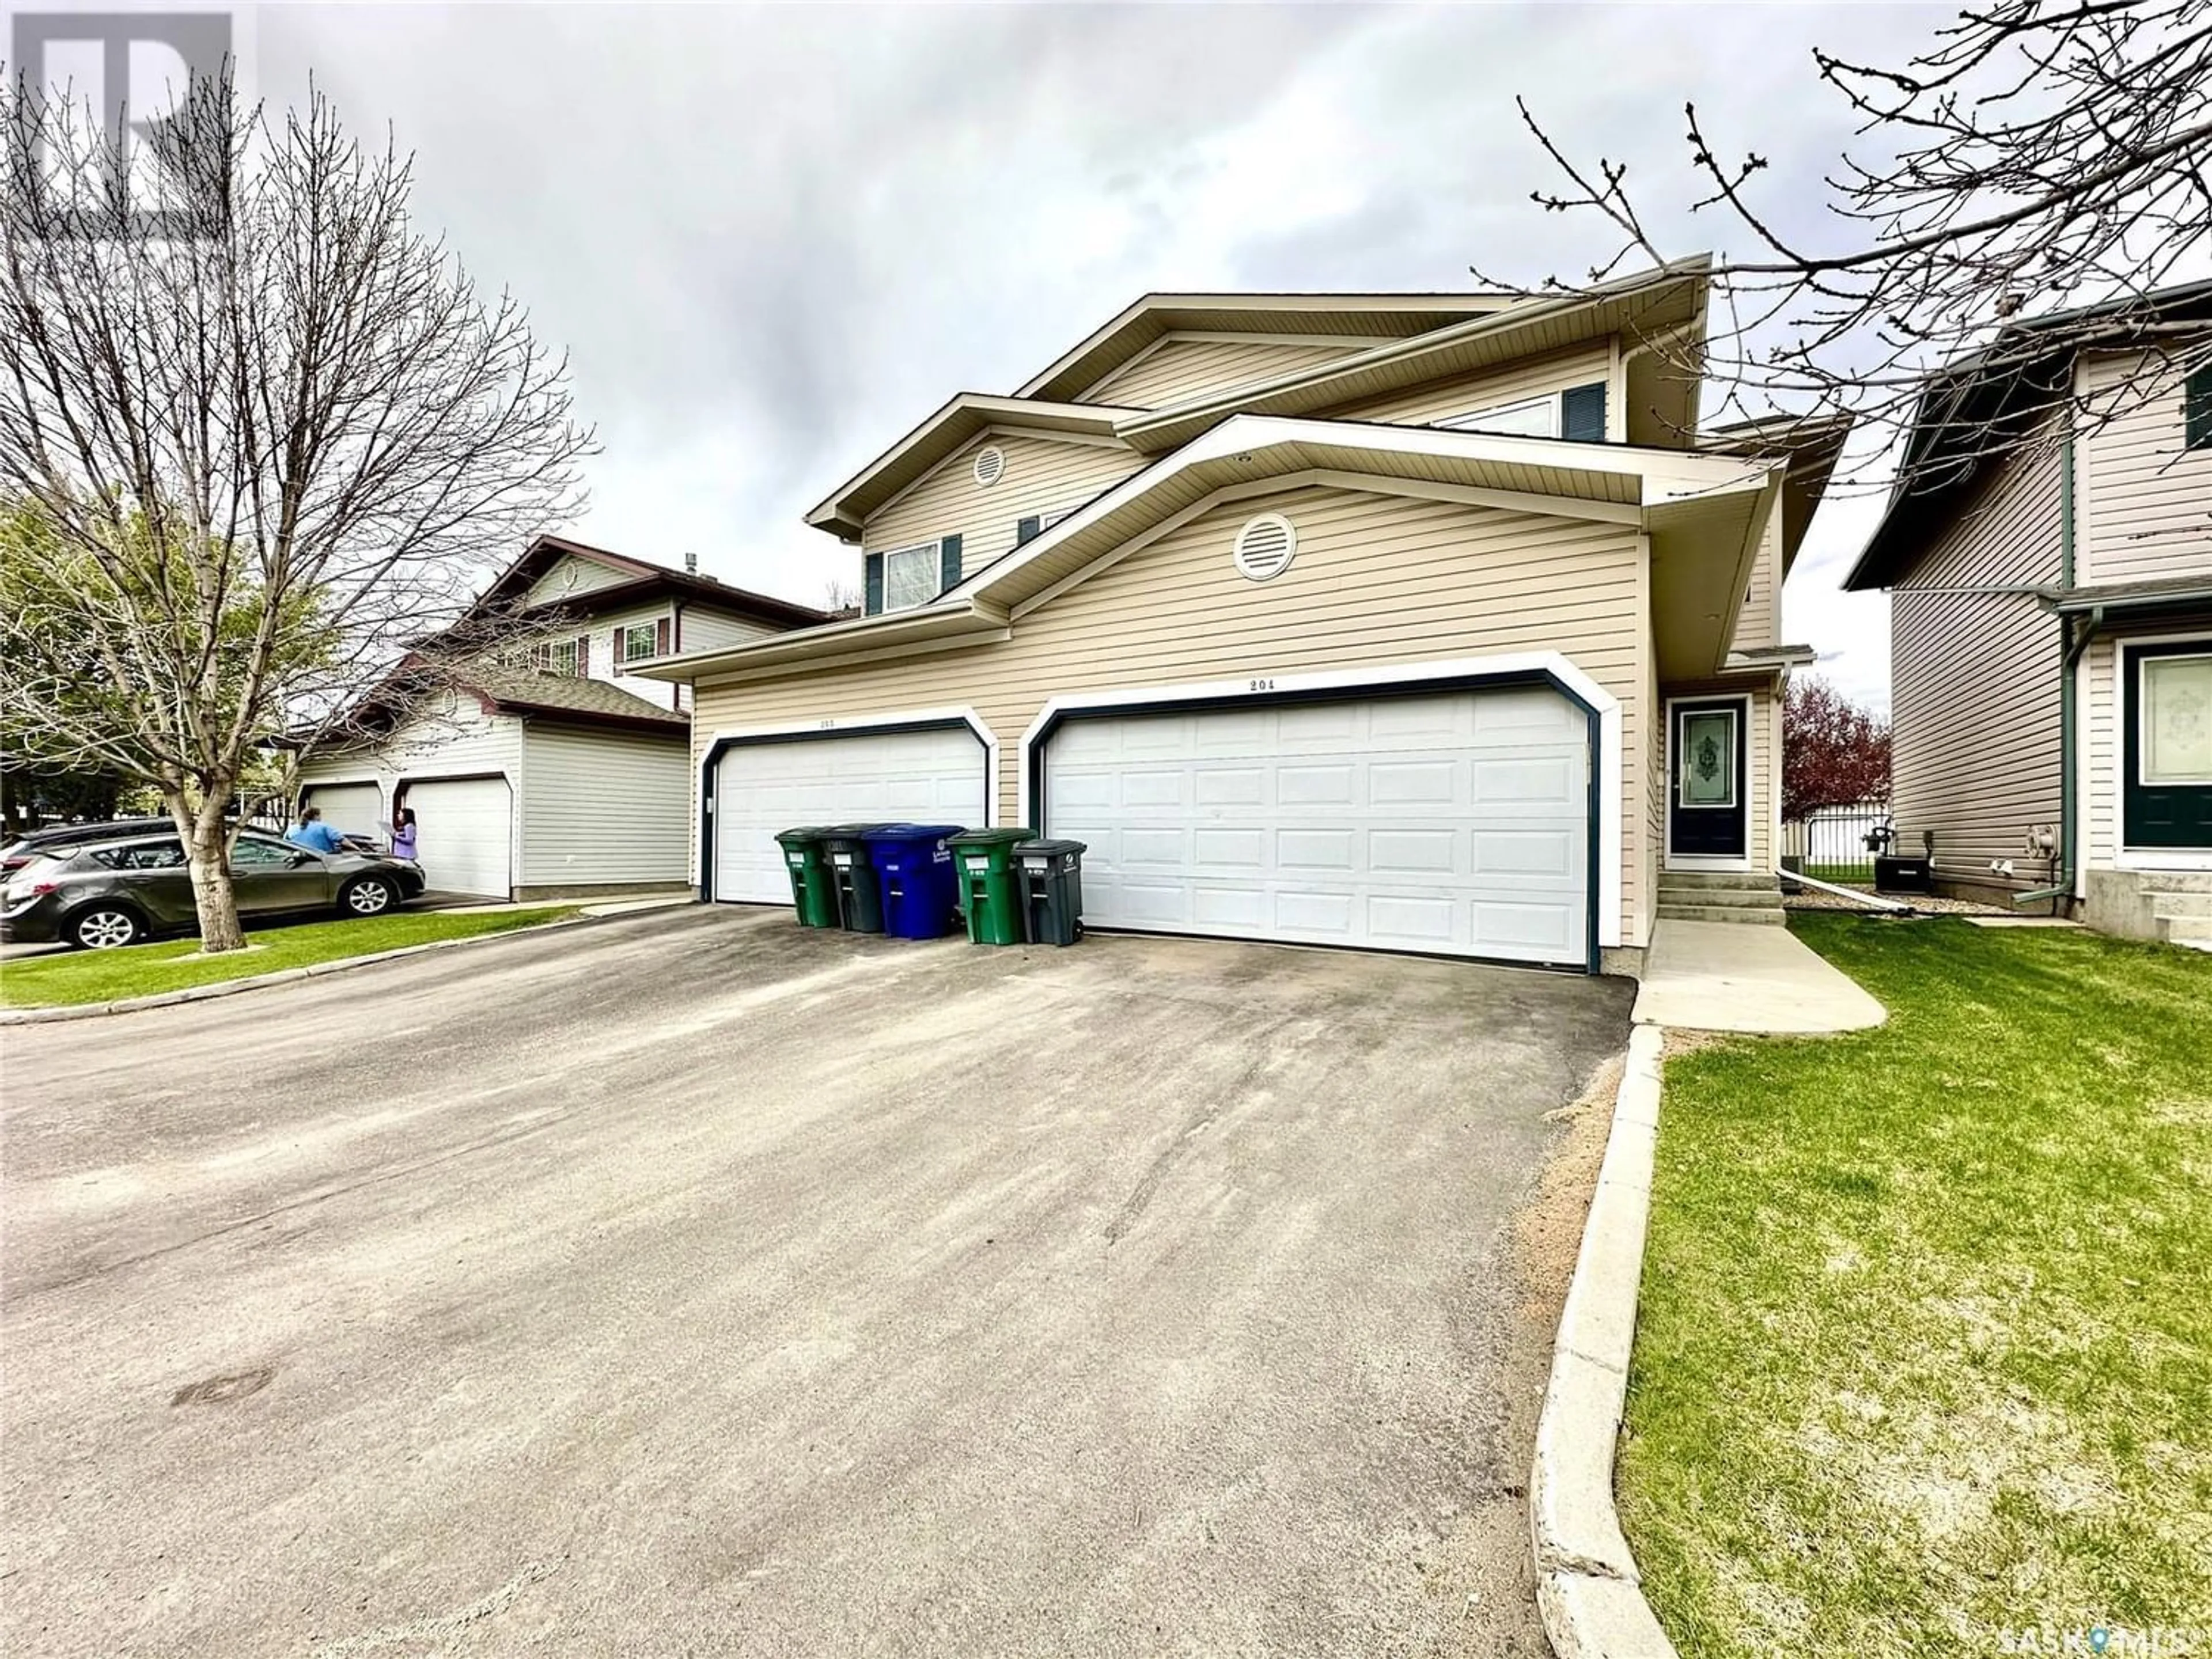 A pic from exterior of the house or condo for 204 615 Kenderdine ROAD, Saskatoon Saskatchewan S7N4V1